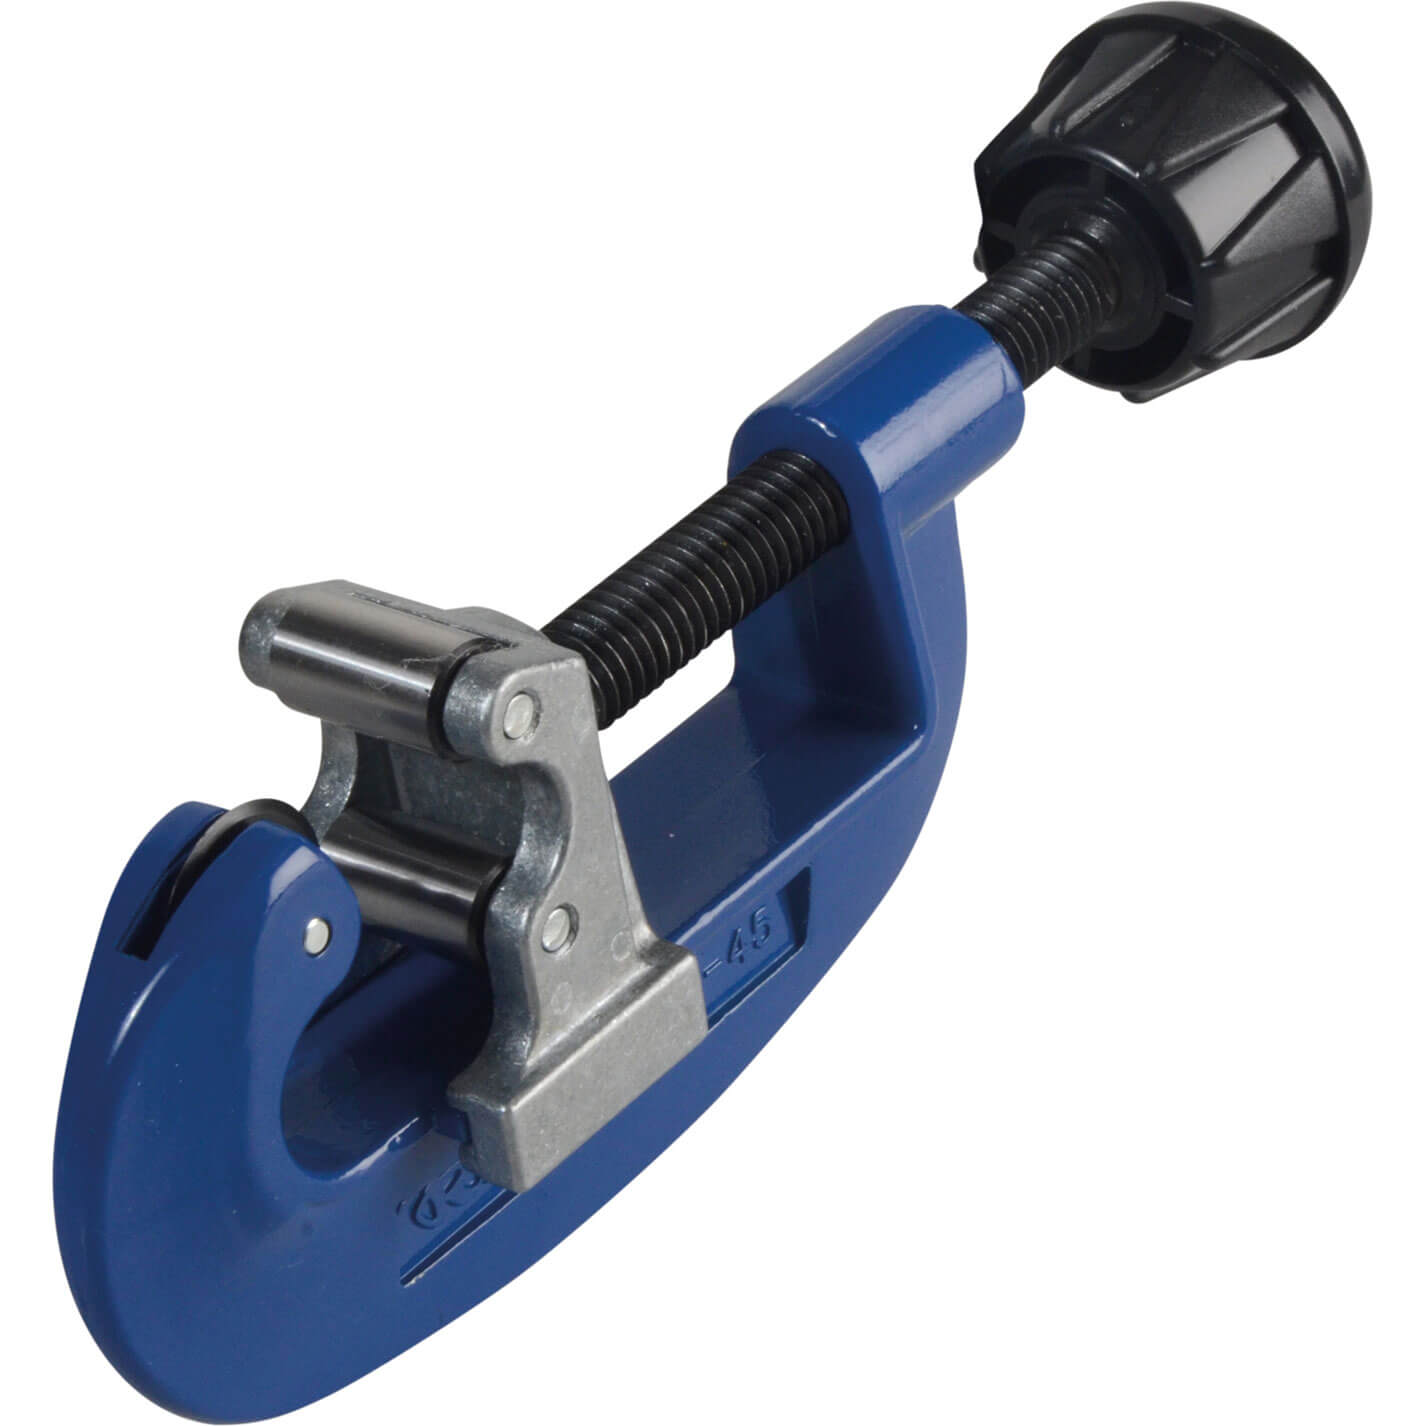 Image of Irwin Record 200-45 Pipe Cutter 15mm - 45mm